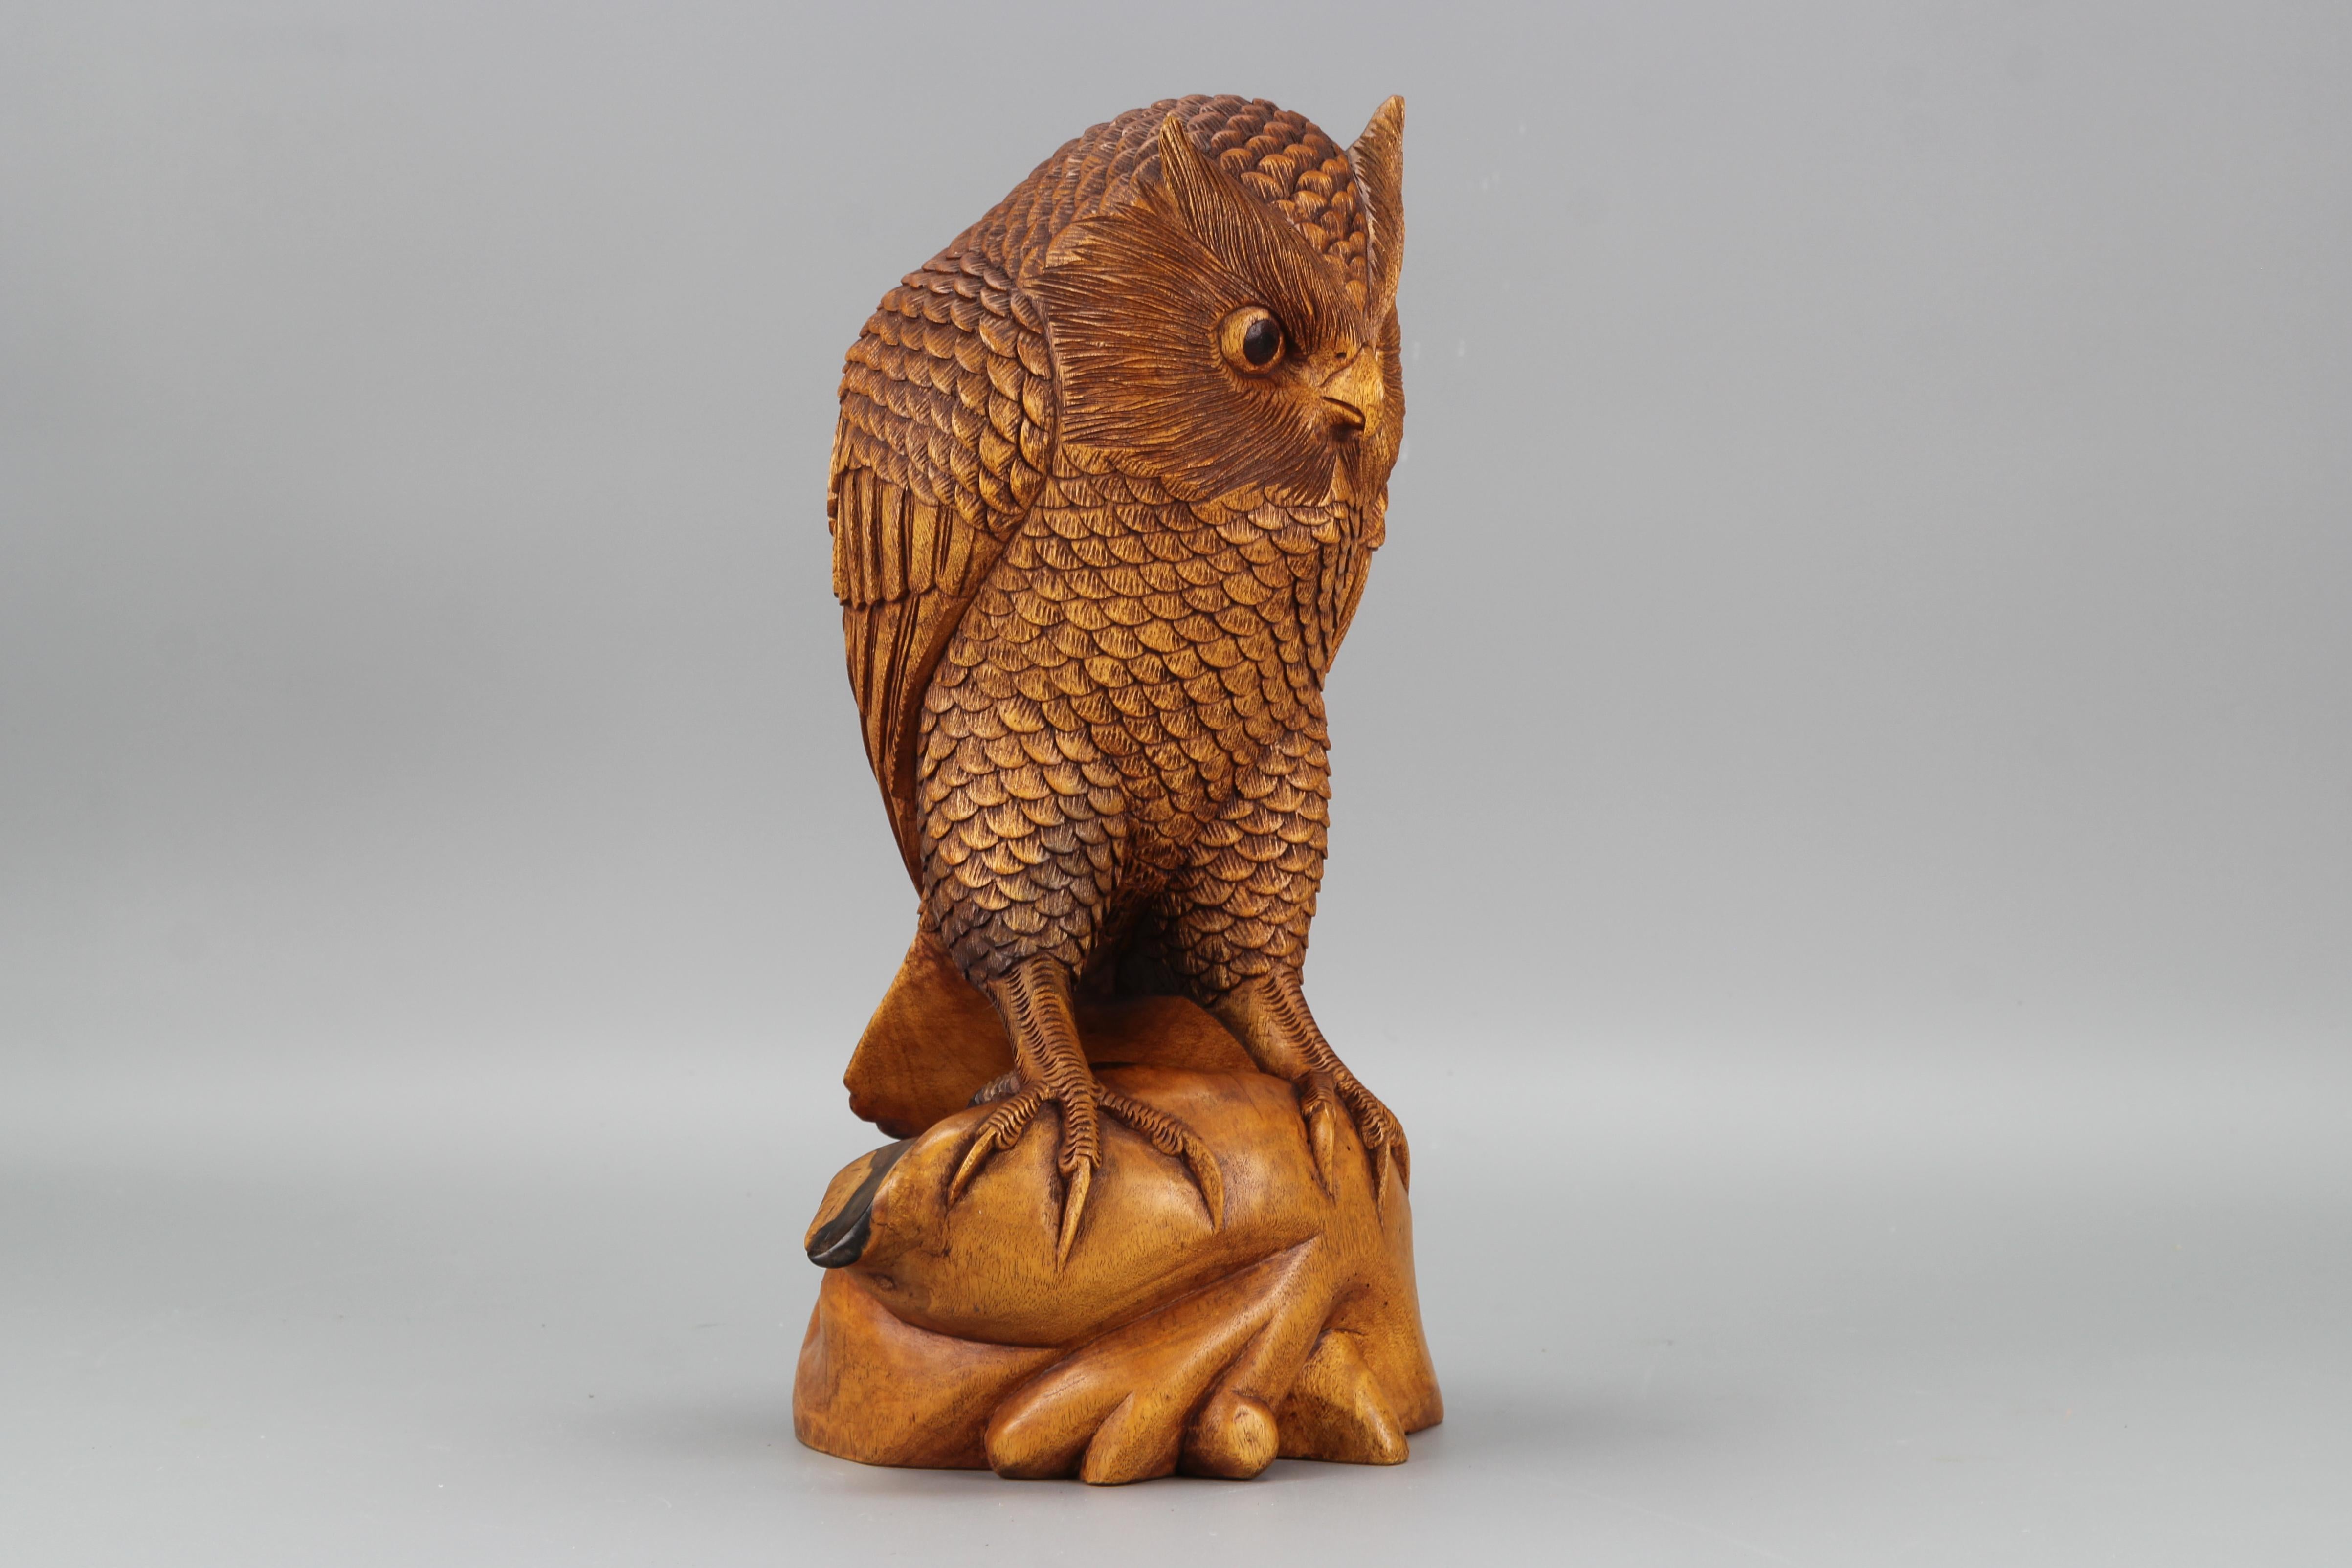 A handsome vintage hand-carved wooden owl sculpture, Asia, circa the 1970s.
This expressive and beautifully carved light brown wooden owl, finely detailed right down to the feathers, perching on wood, would be a great eye-catcher in any room or